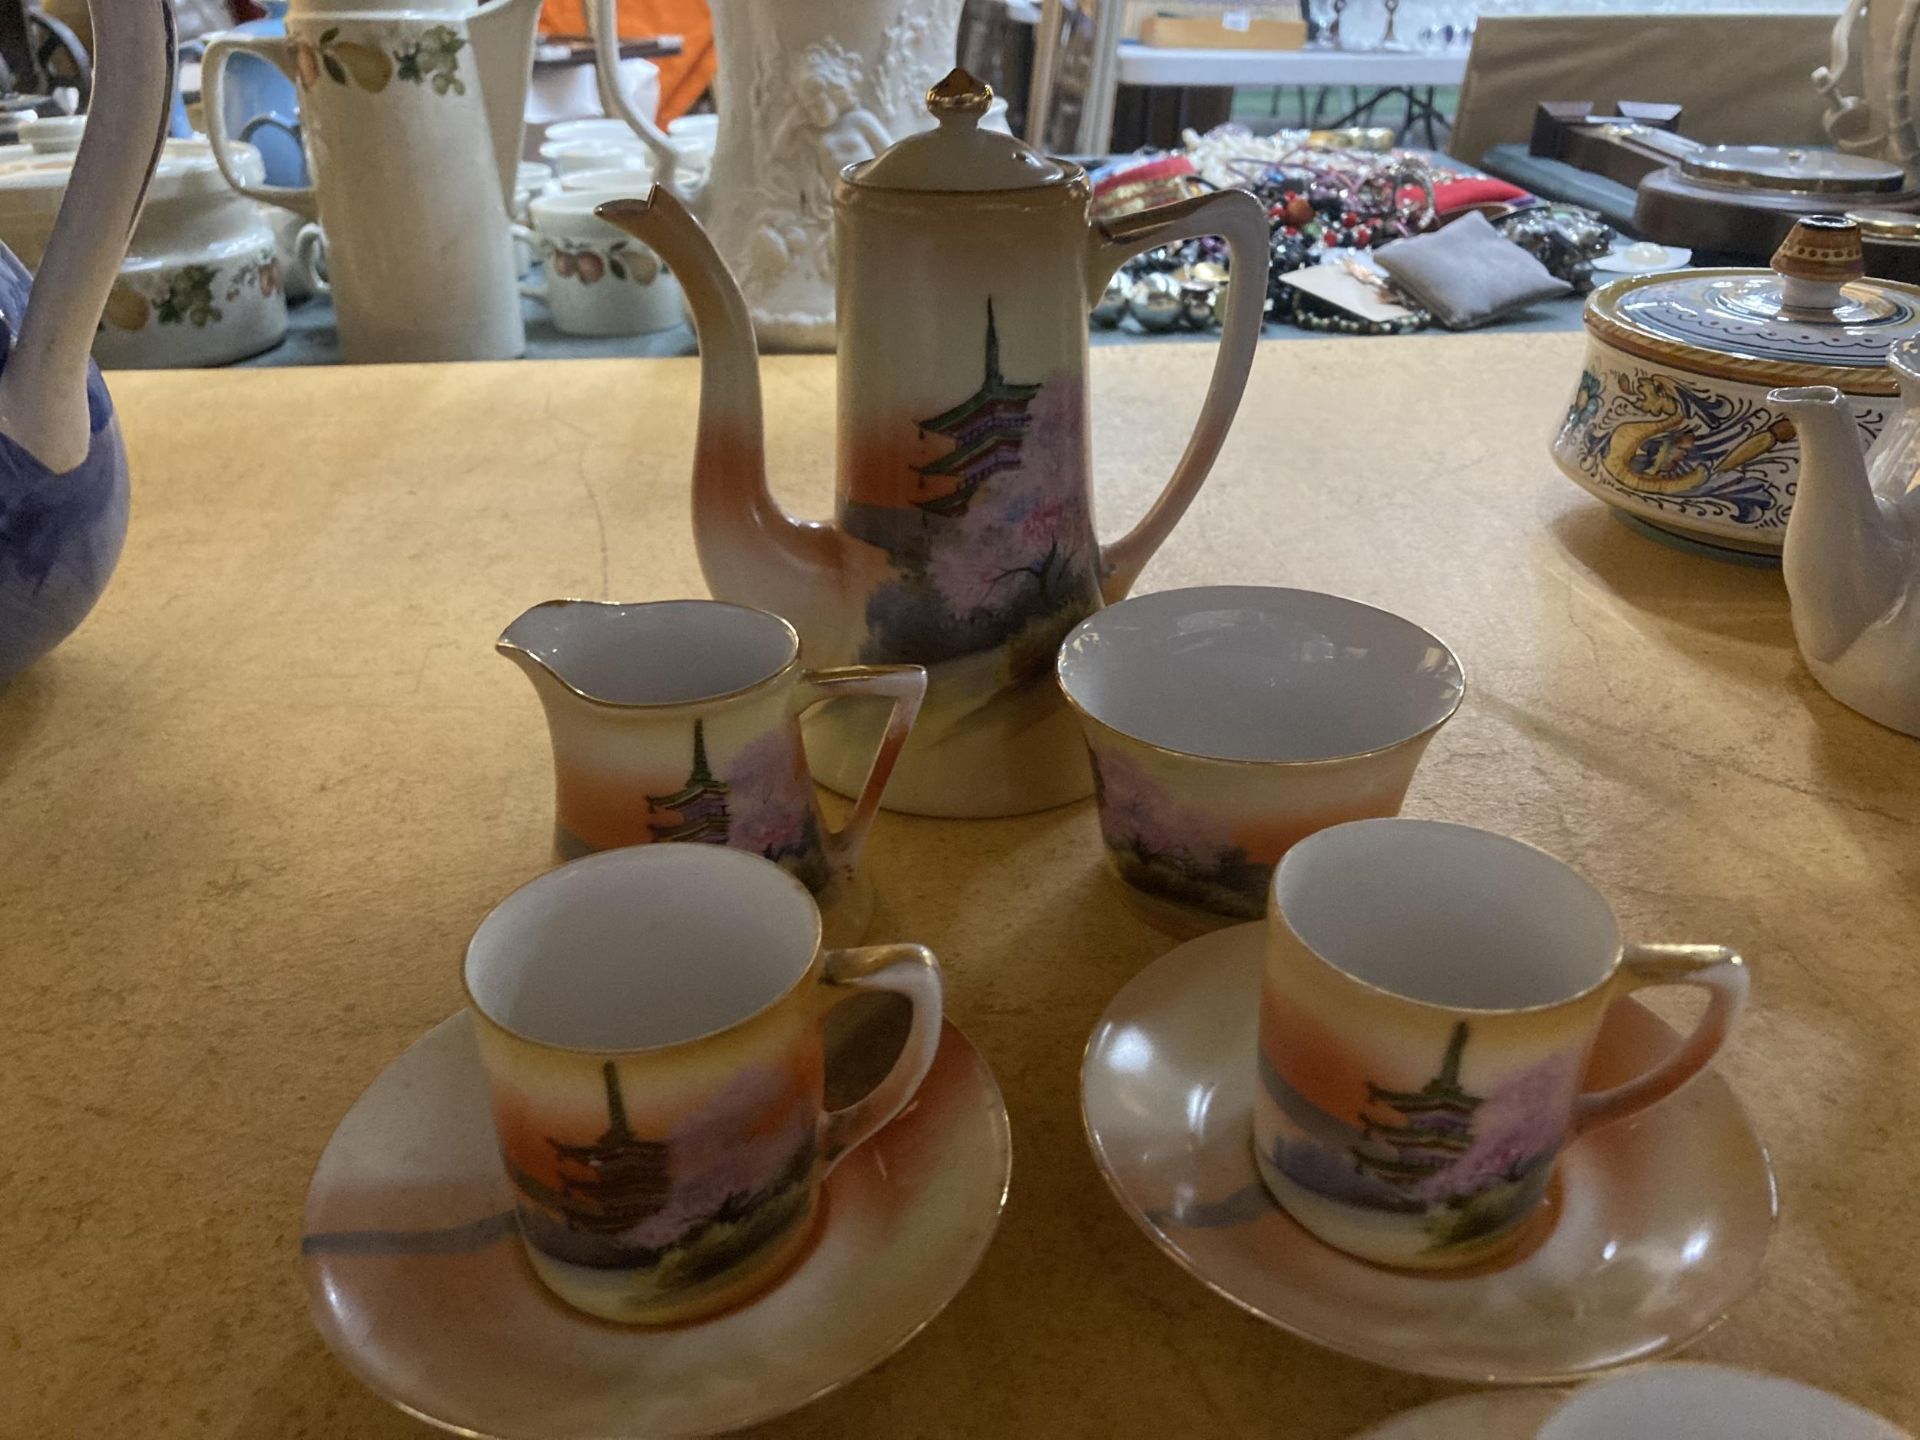 A VINTAGE JAPANESE NORITAKE COFFEE SET TO INCLUDE A COFFEE POT, CREAM JUG, SUGAR BOWL, CUPS MAND - Image 3 of 4